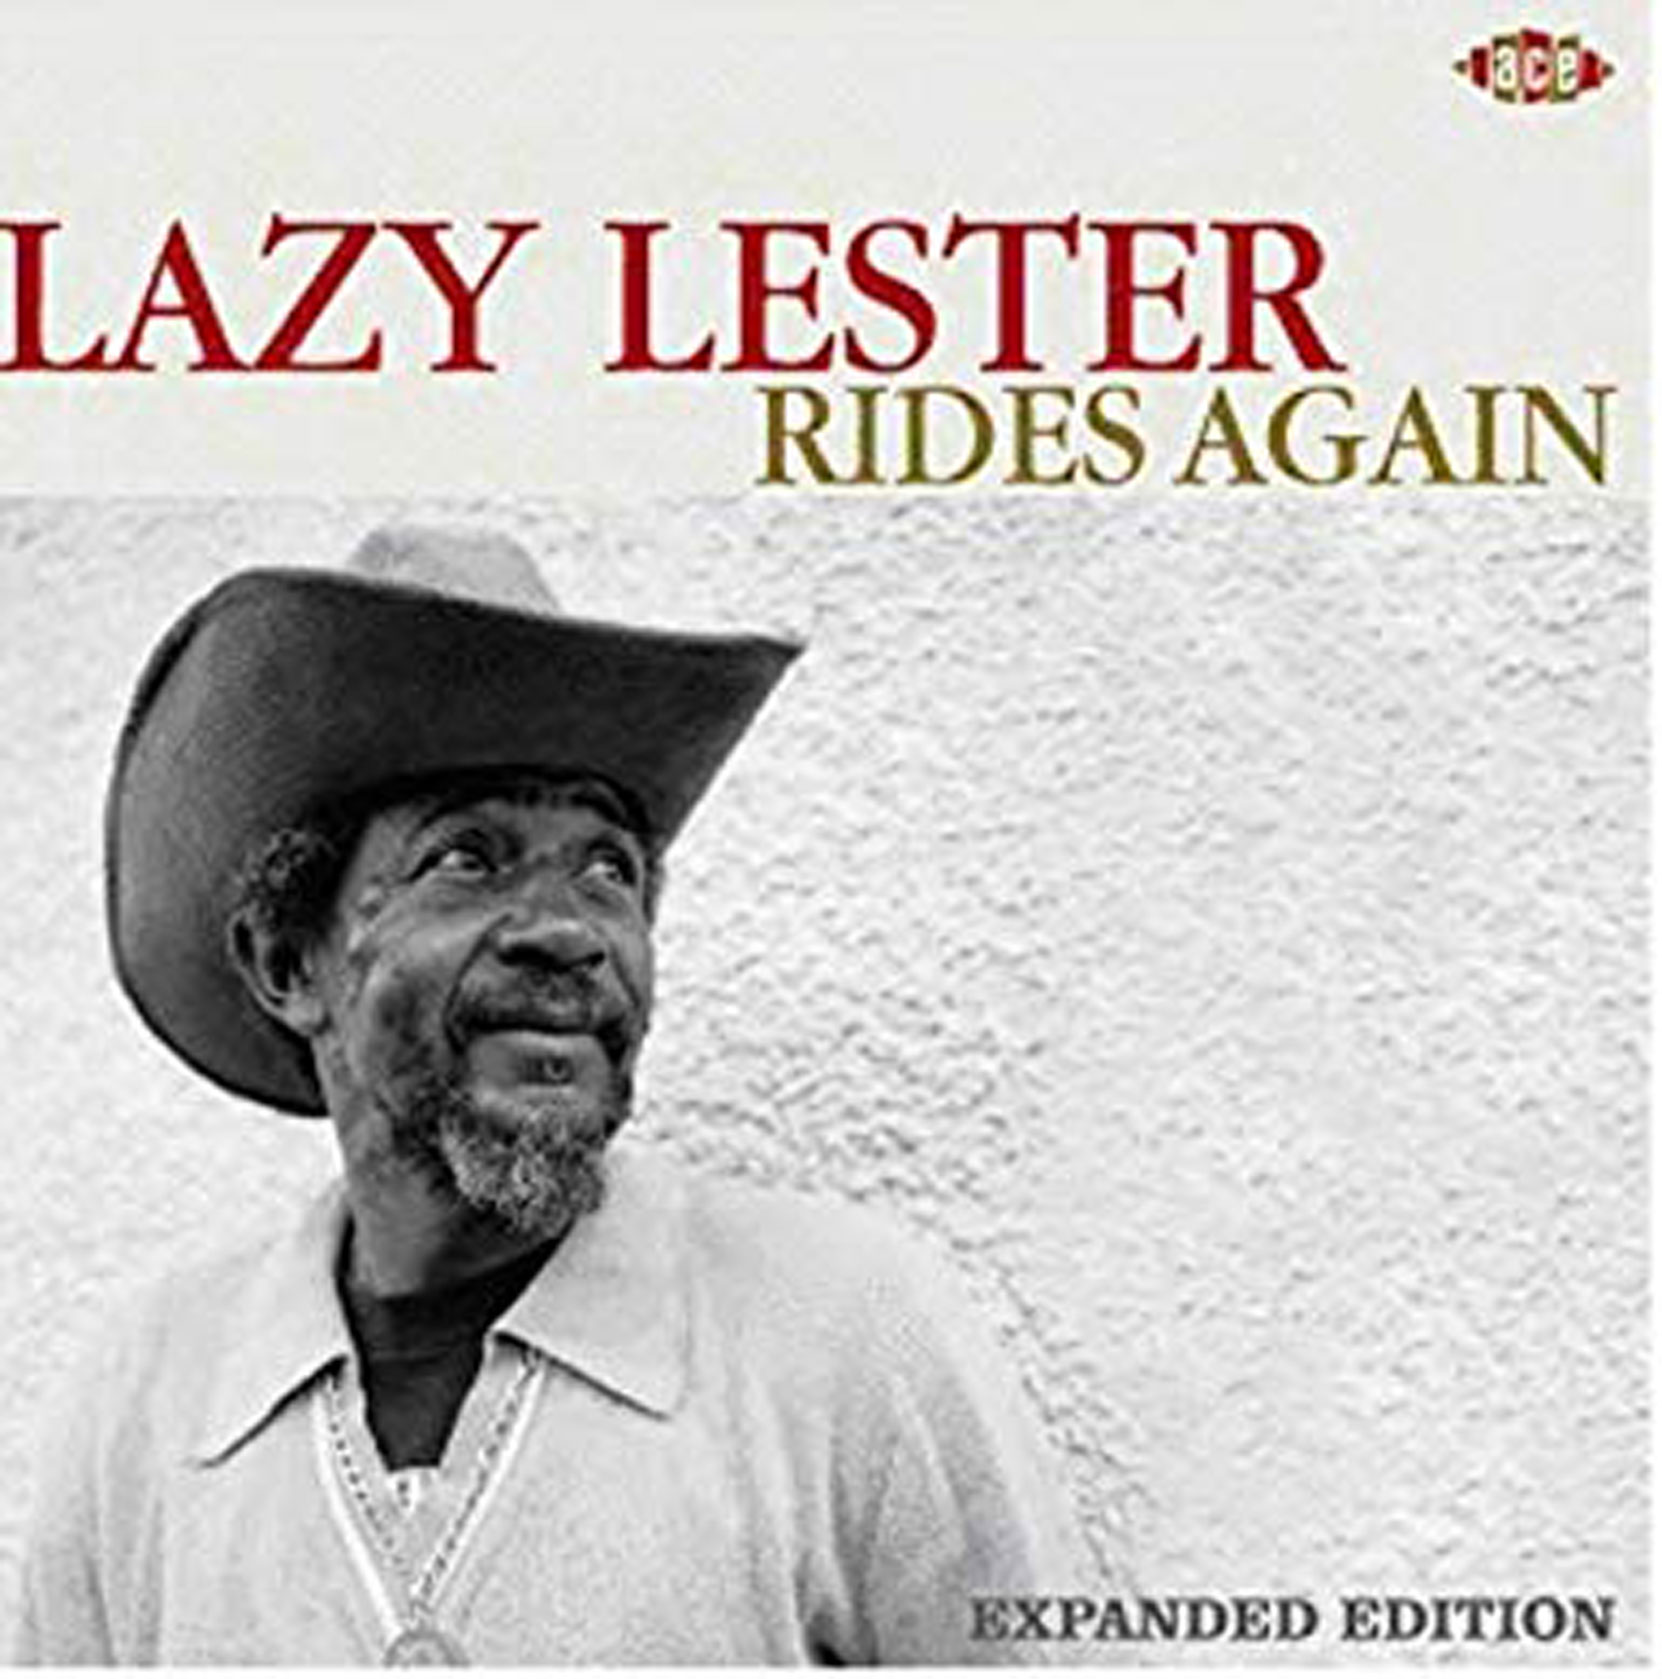 Lazy Lester - Laszy Lester Rides Again, Reissue of the original 1988 album (with bi=onus tracks) released on Ace Records. CD cover.